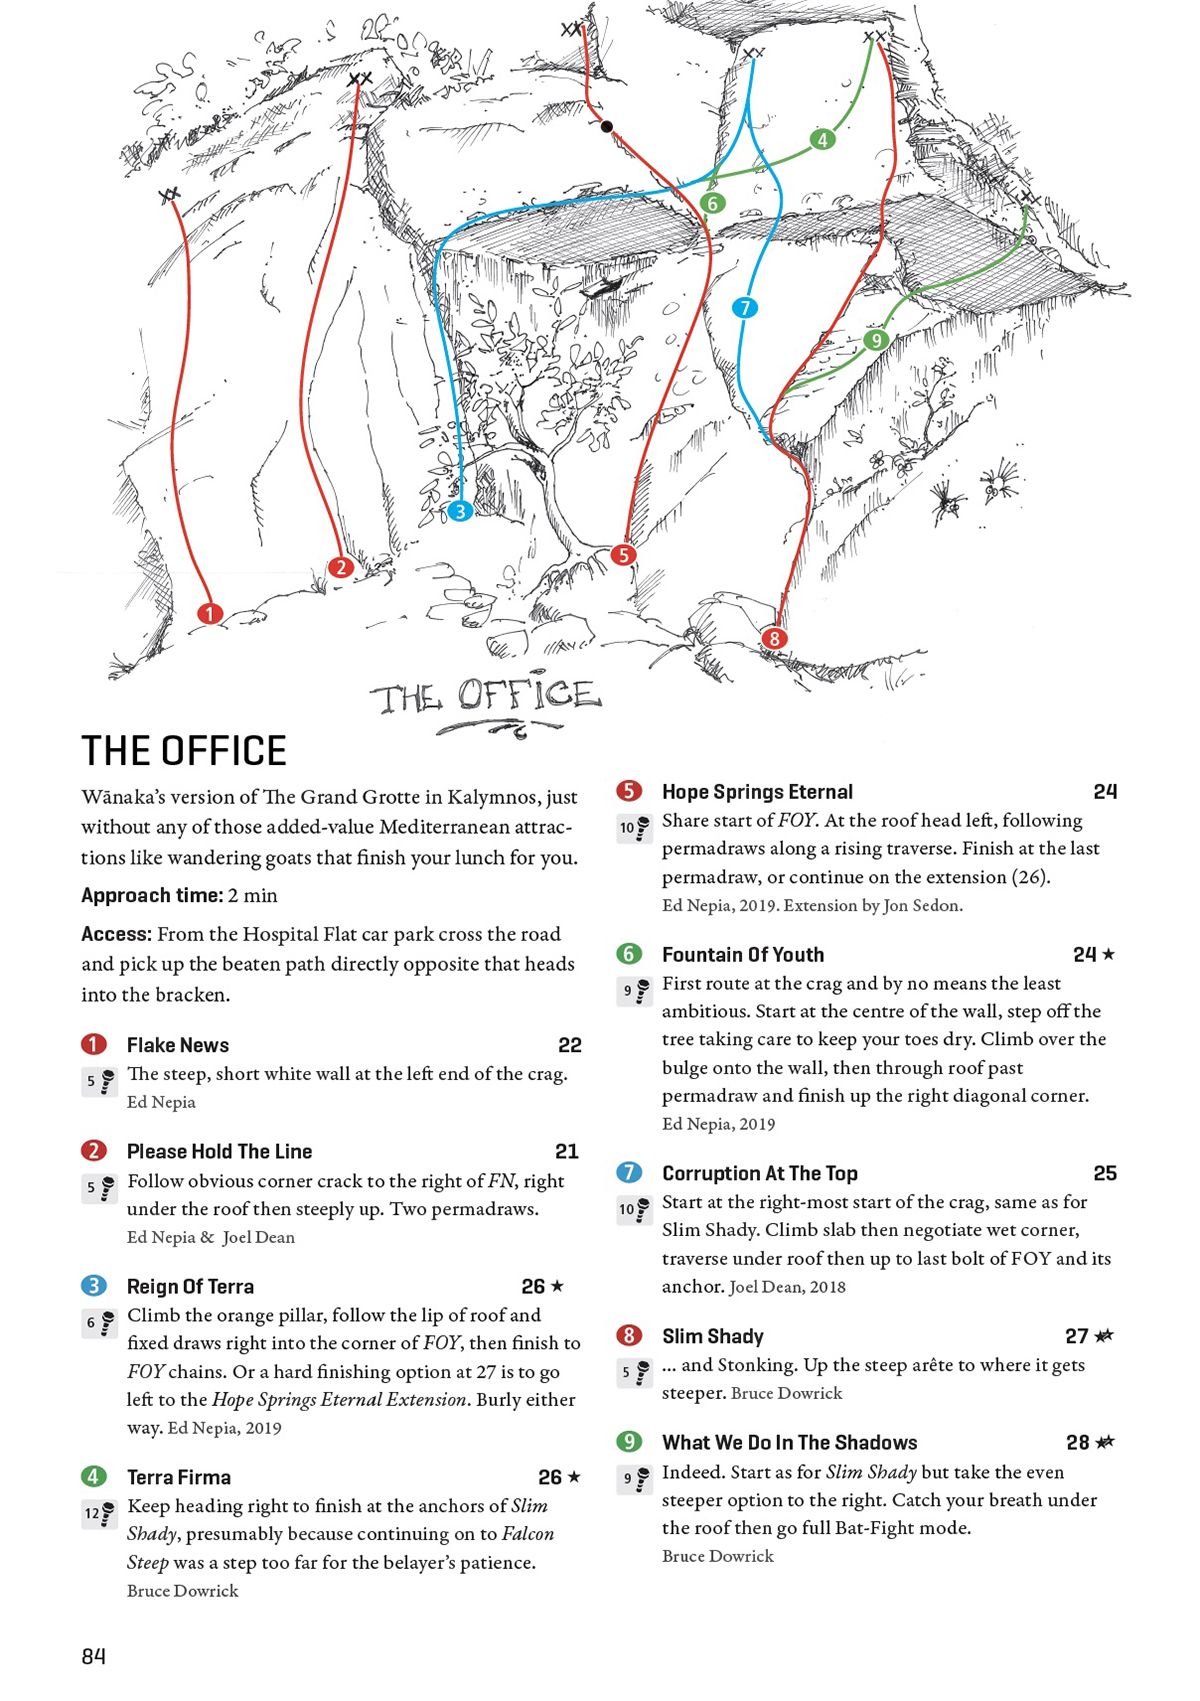 Sample page from guidebook